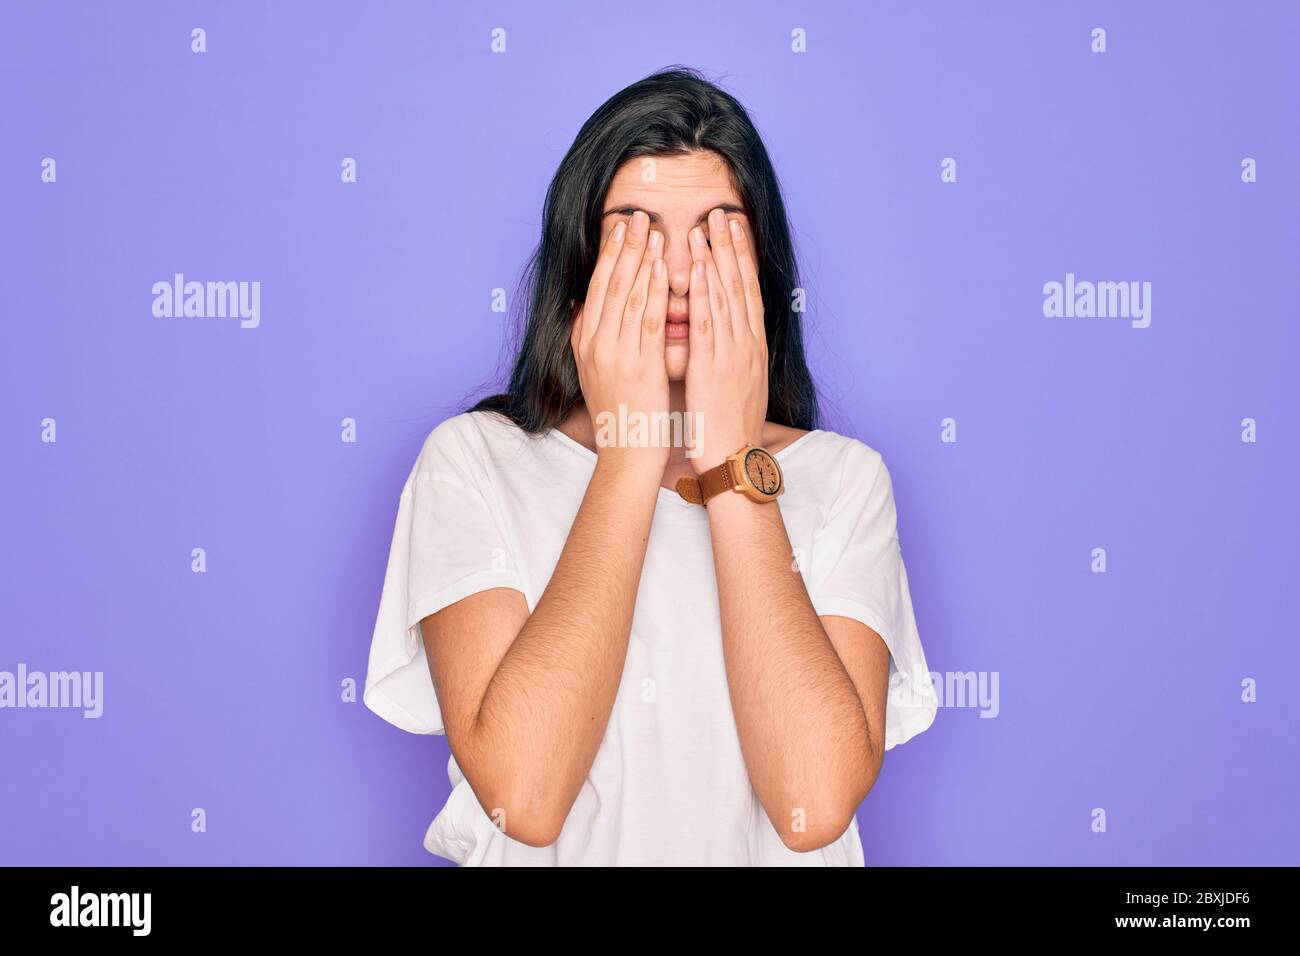 Young beautiful brunette woman wearing casual white t-shirt over purple background rubbing eyes for fatigue and headache, sleepy and tired expression. Stock Photo